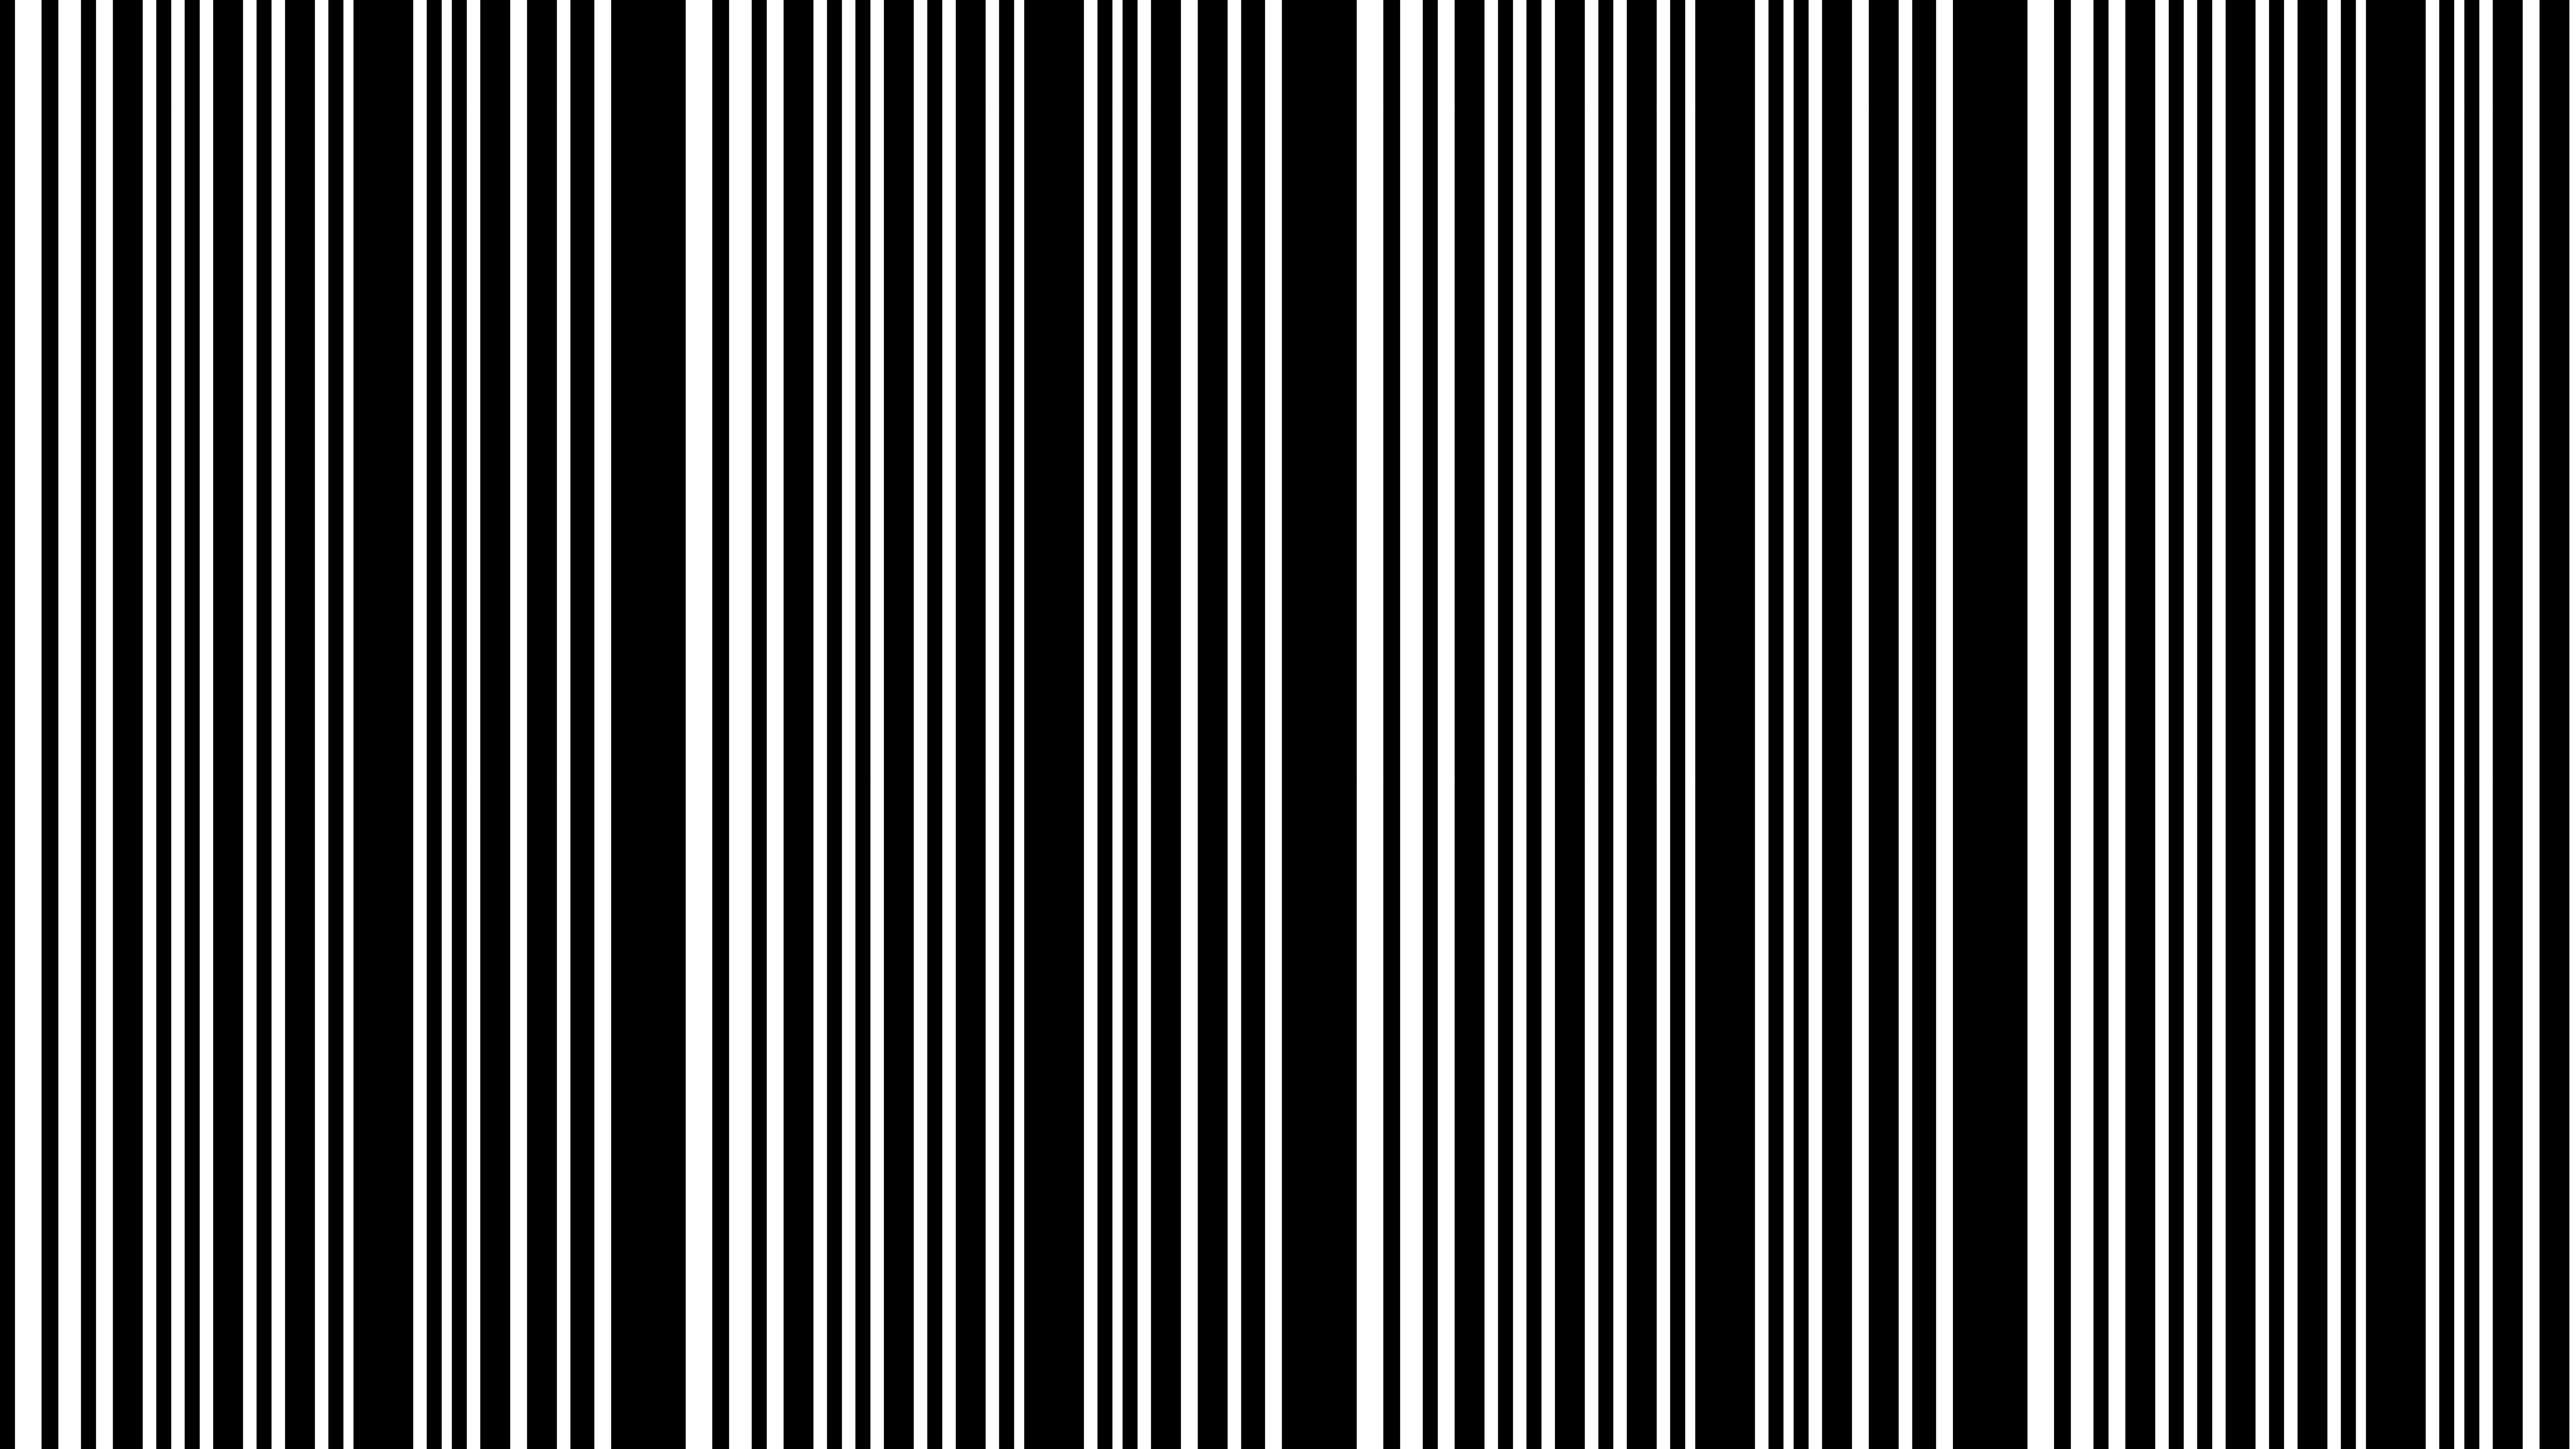 Free Black and White Seamless Vertical Stripes Background Pattern